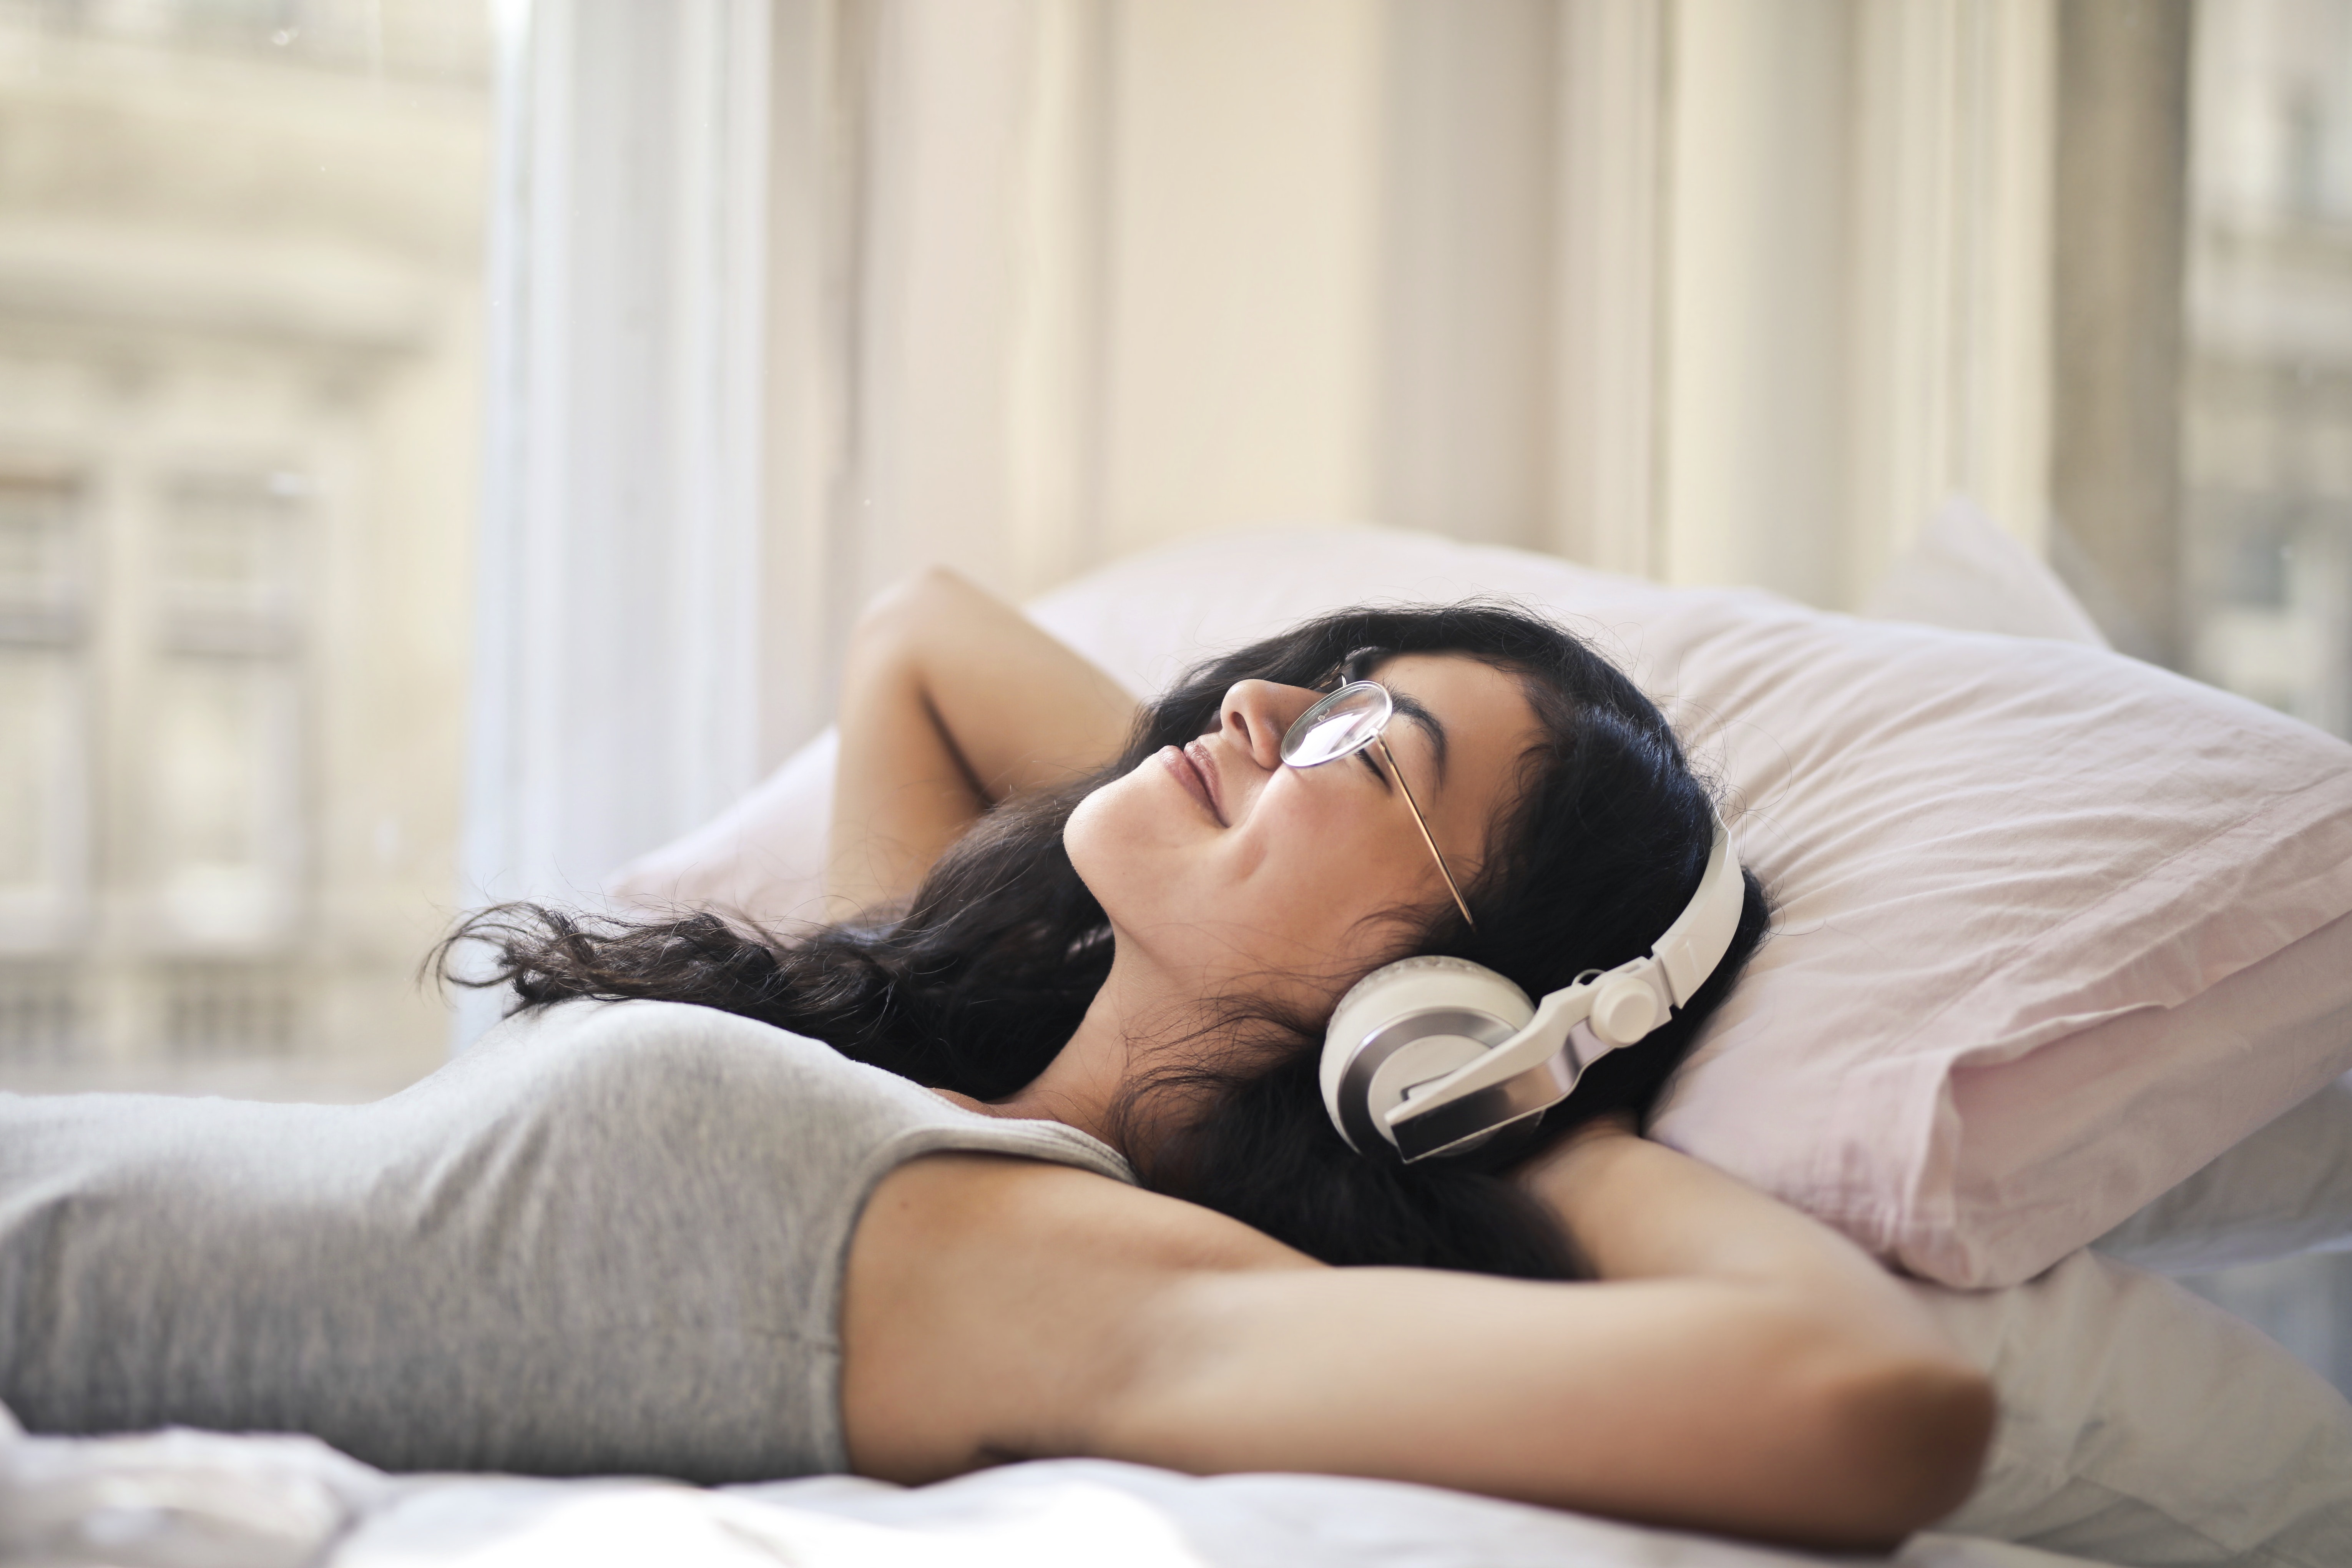 woman-in-gray-tank-top-lying-on-bed-with-headphones-on.jpg